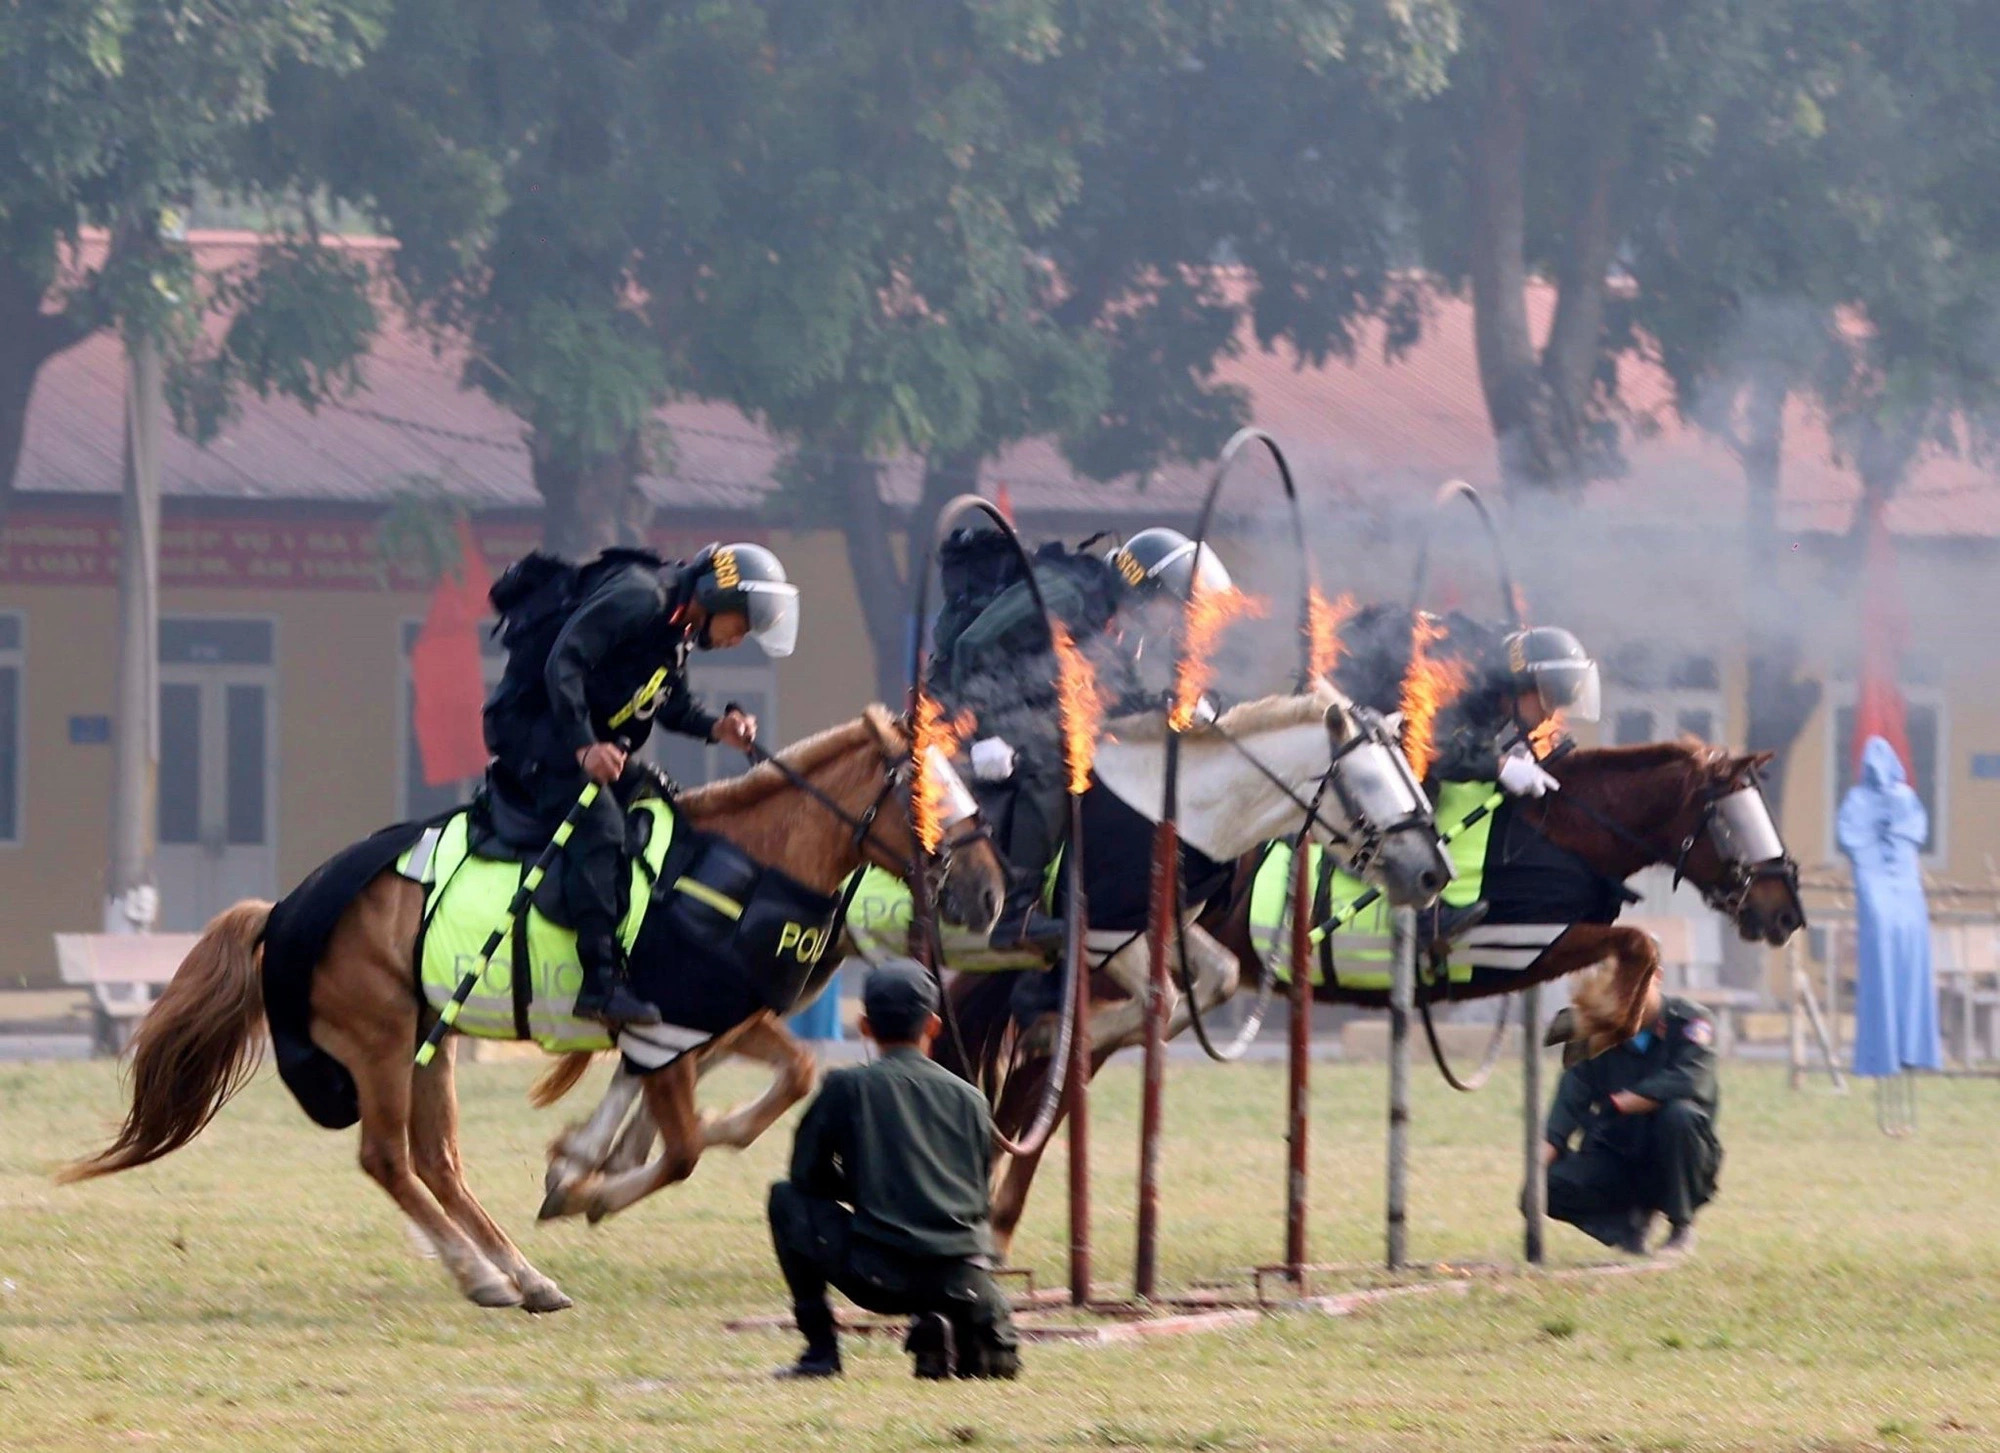 Mounted police officers jump through fire. Photo: Vietnam News Agency